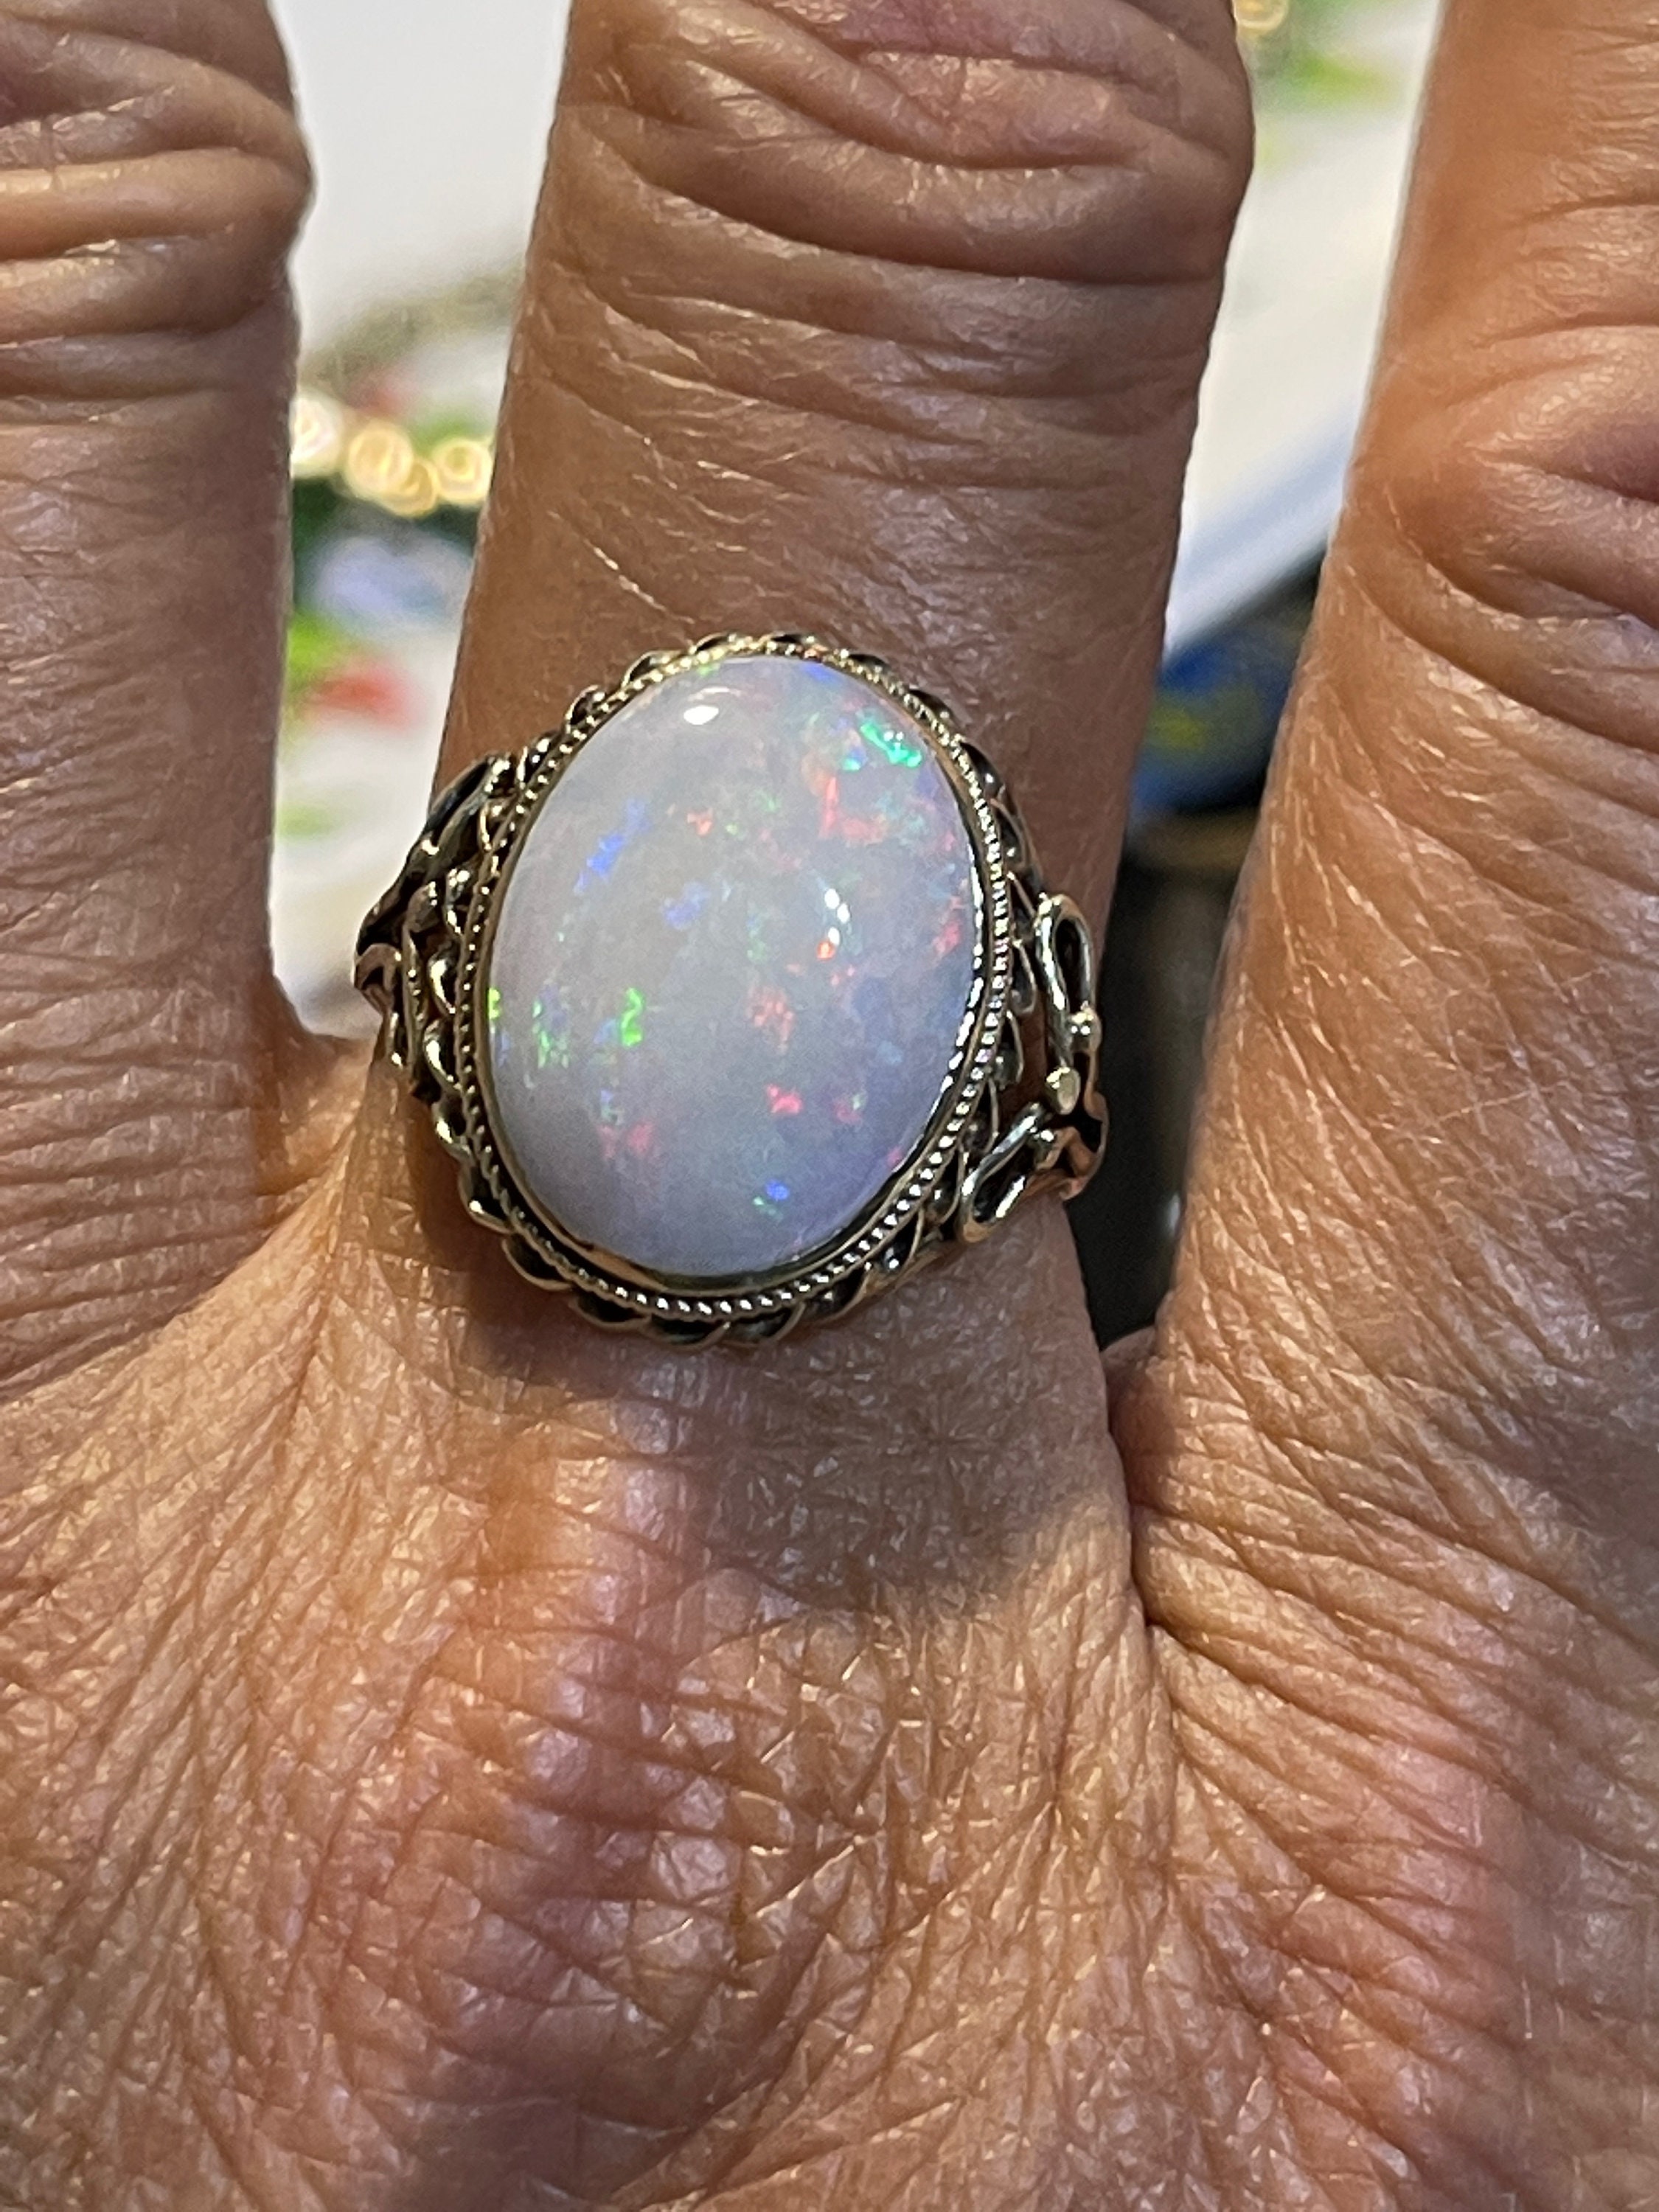 7.5 SIZE SOLID FIRE OPAL STONE IN 10 K white GOLD RING [SOJ6601]